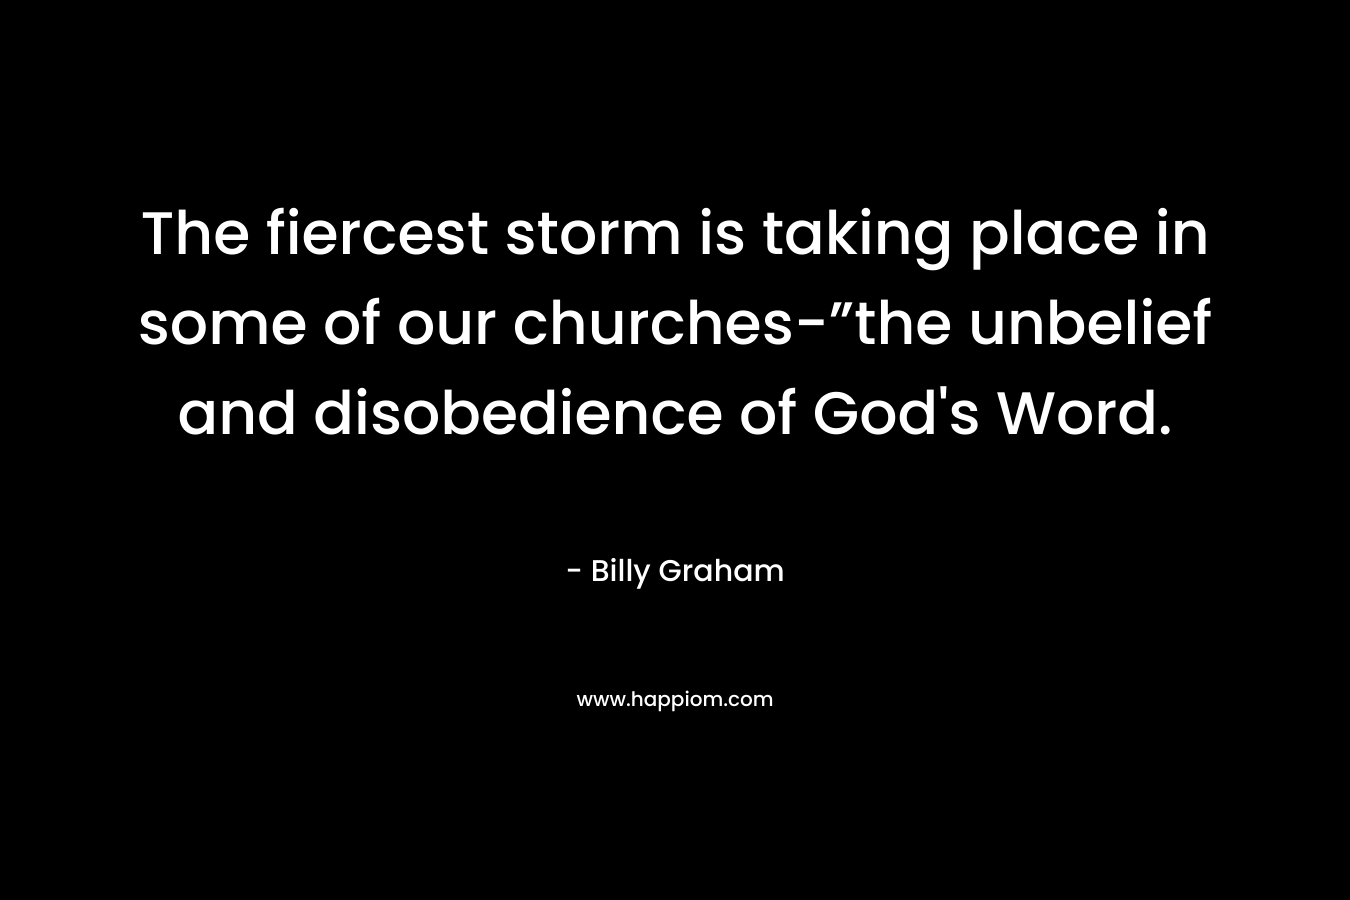 The fiercest storm is taking place in some of our churches-”the unbelief and disobedience of God’s Word. – Billy Graham